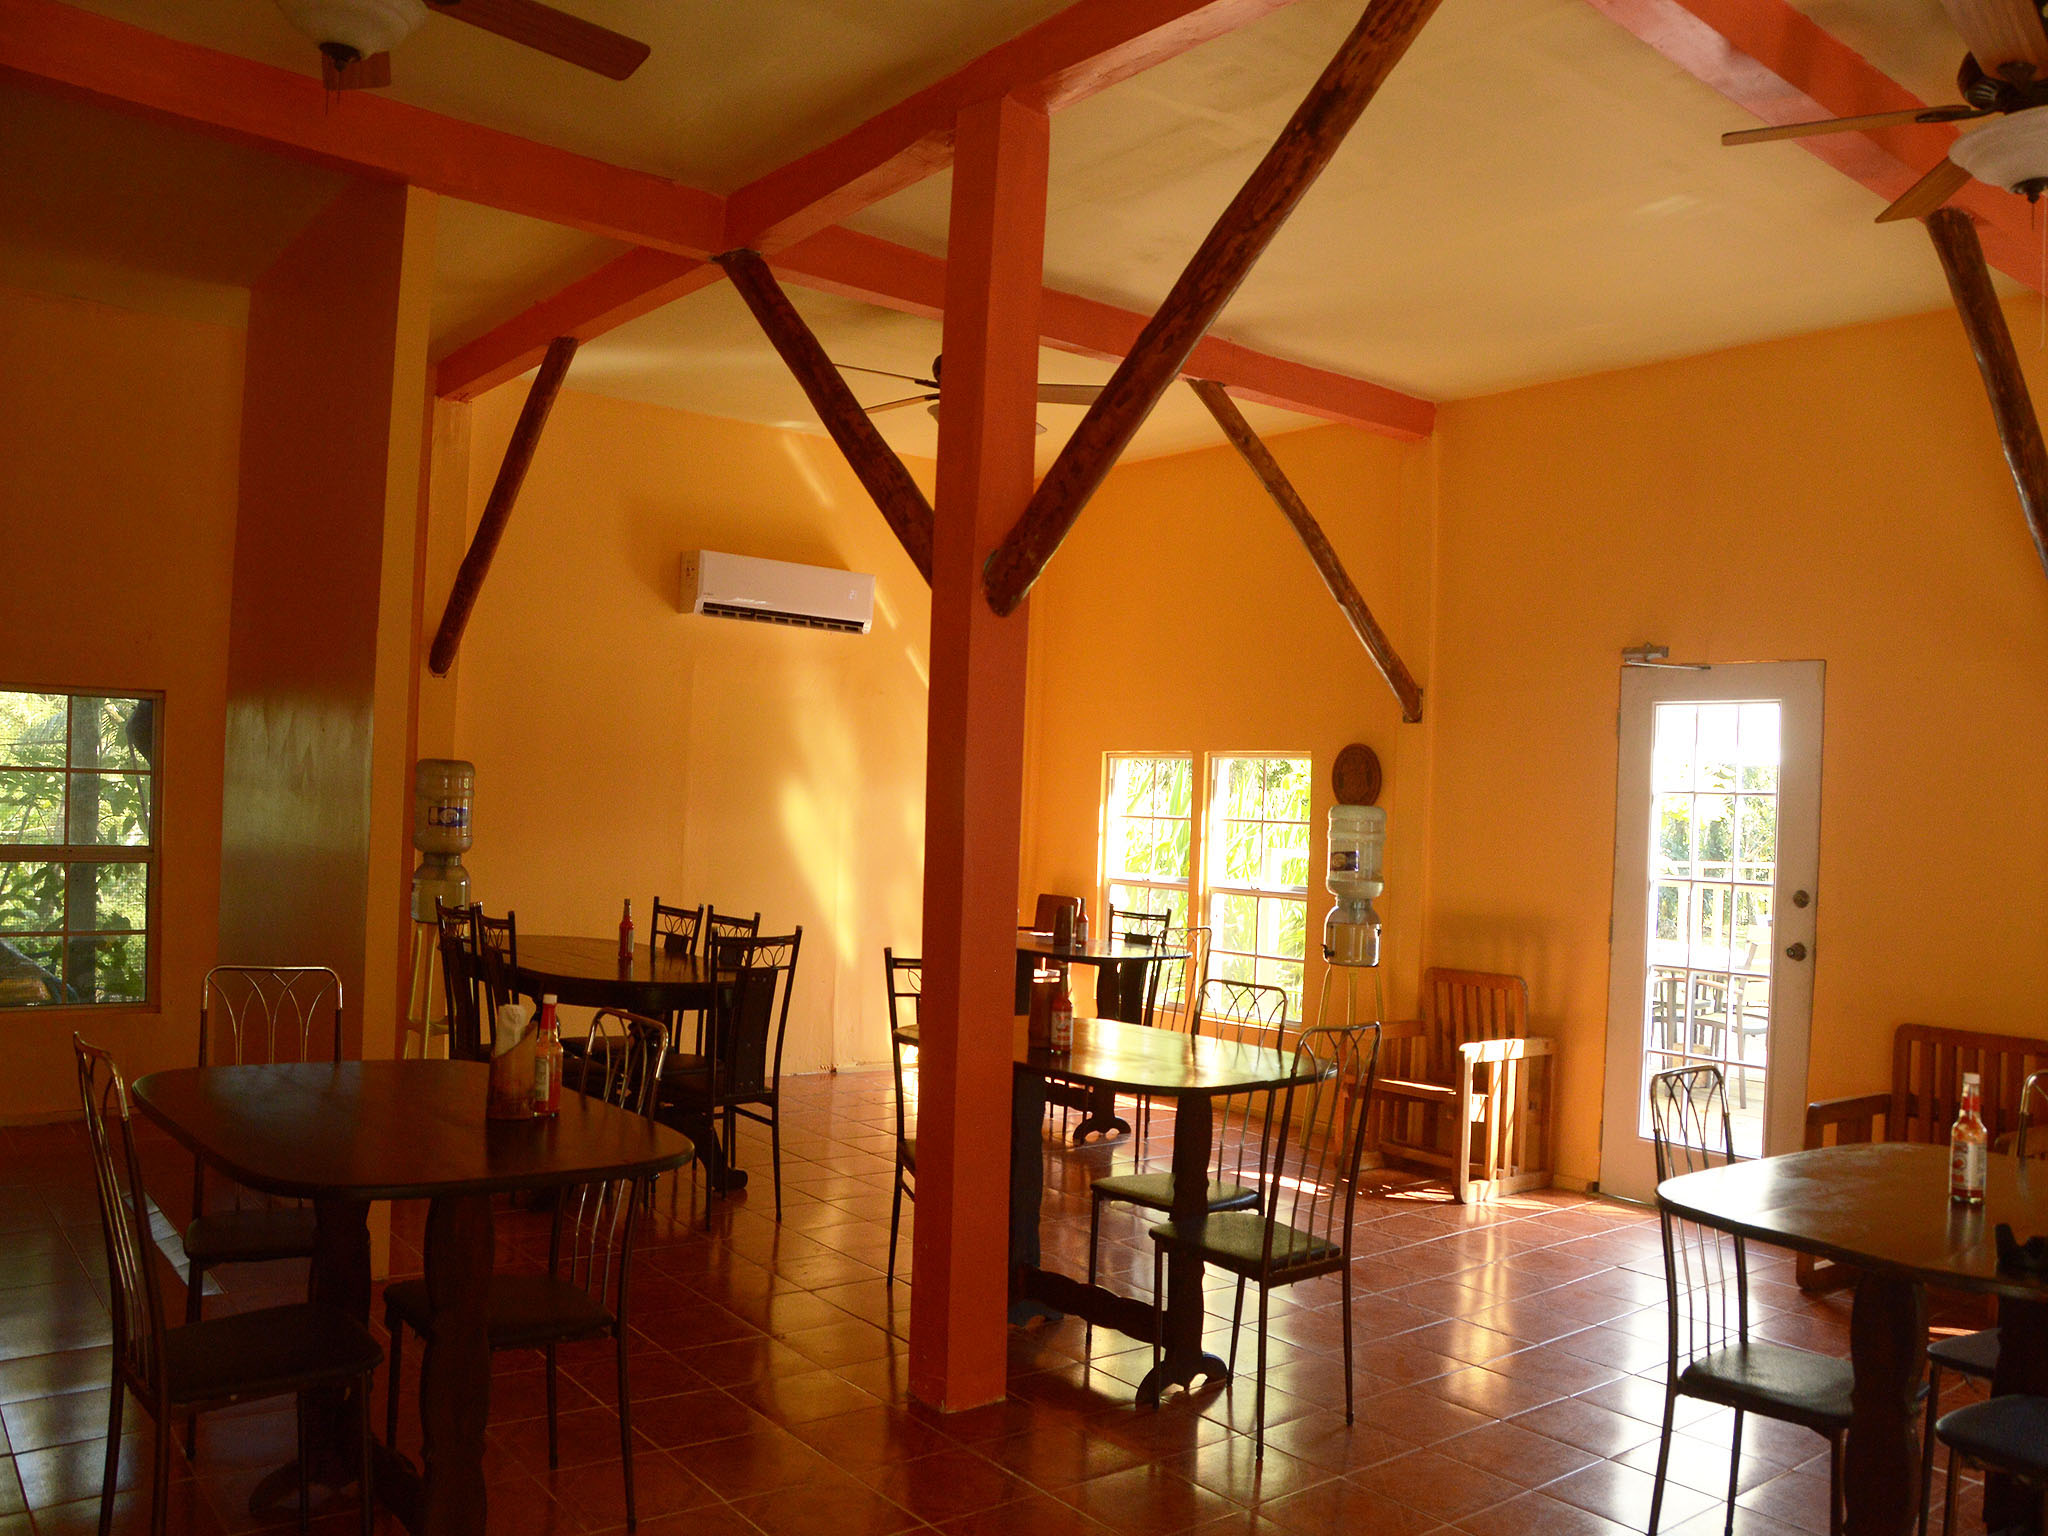 Dining area at Howler Monkey Resort.